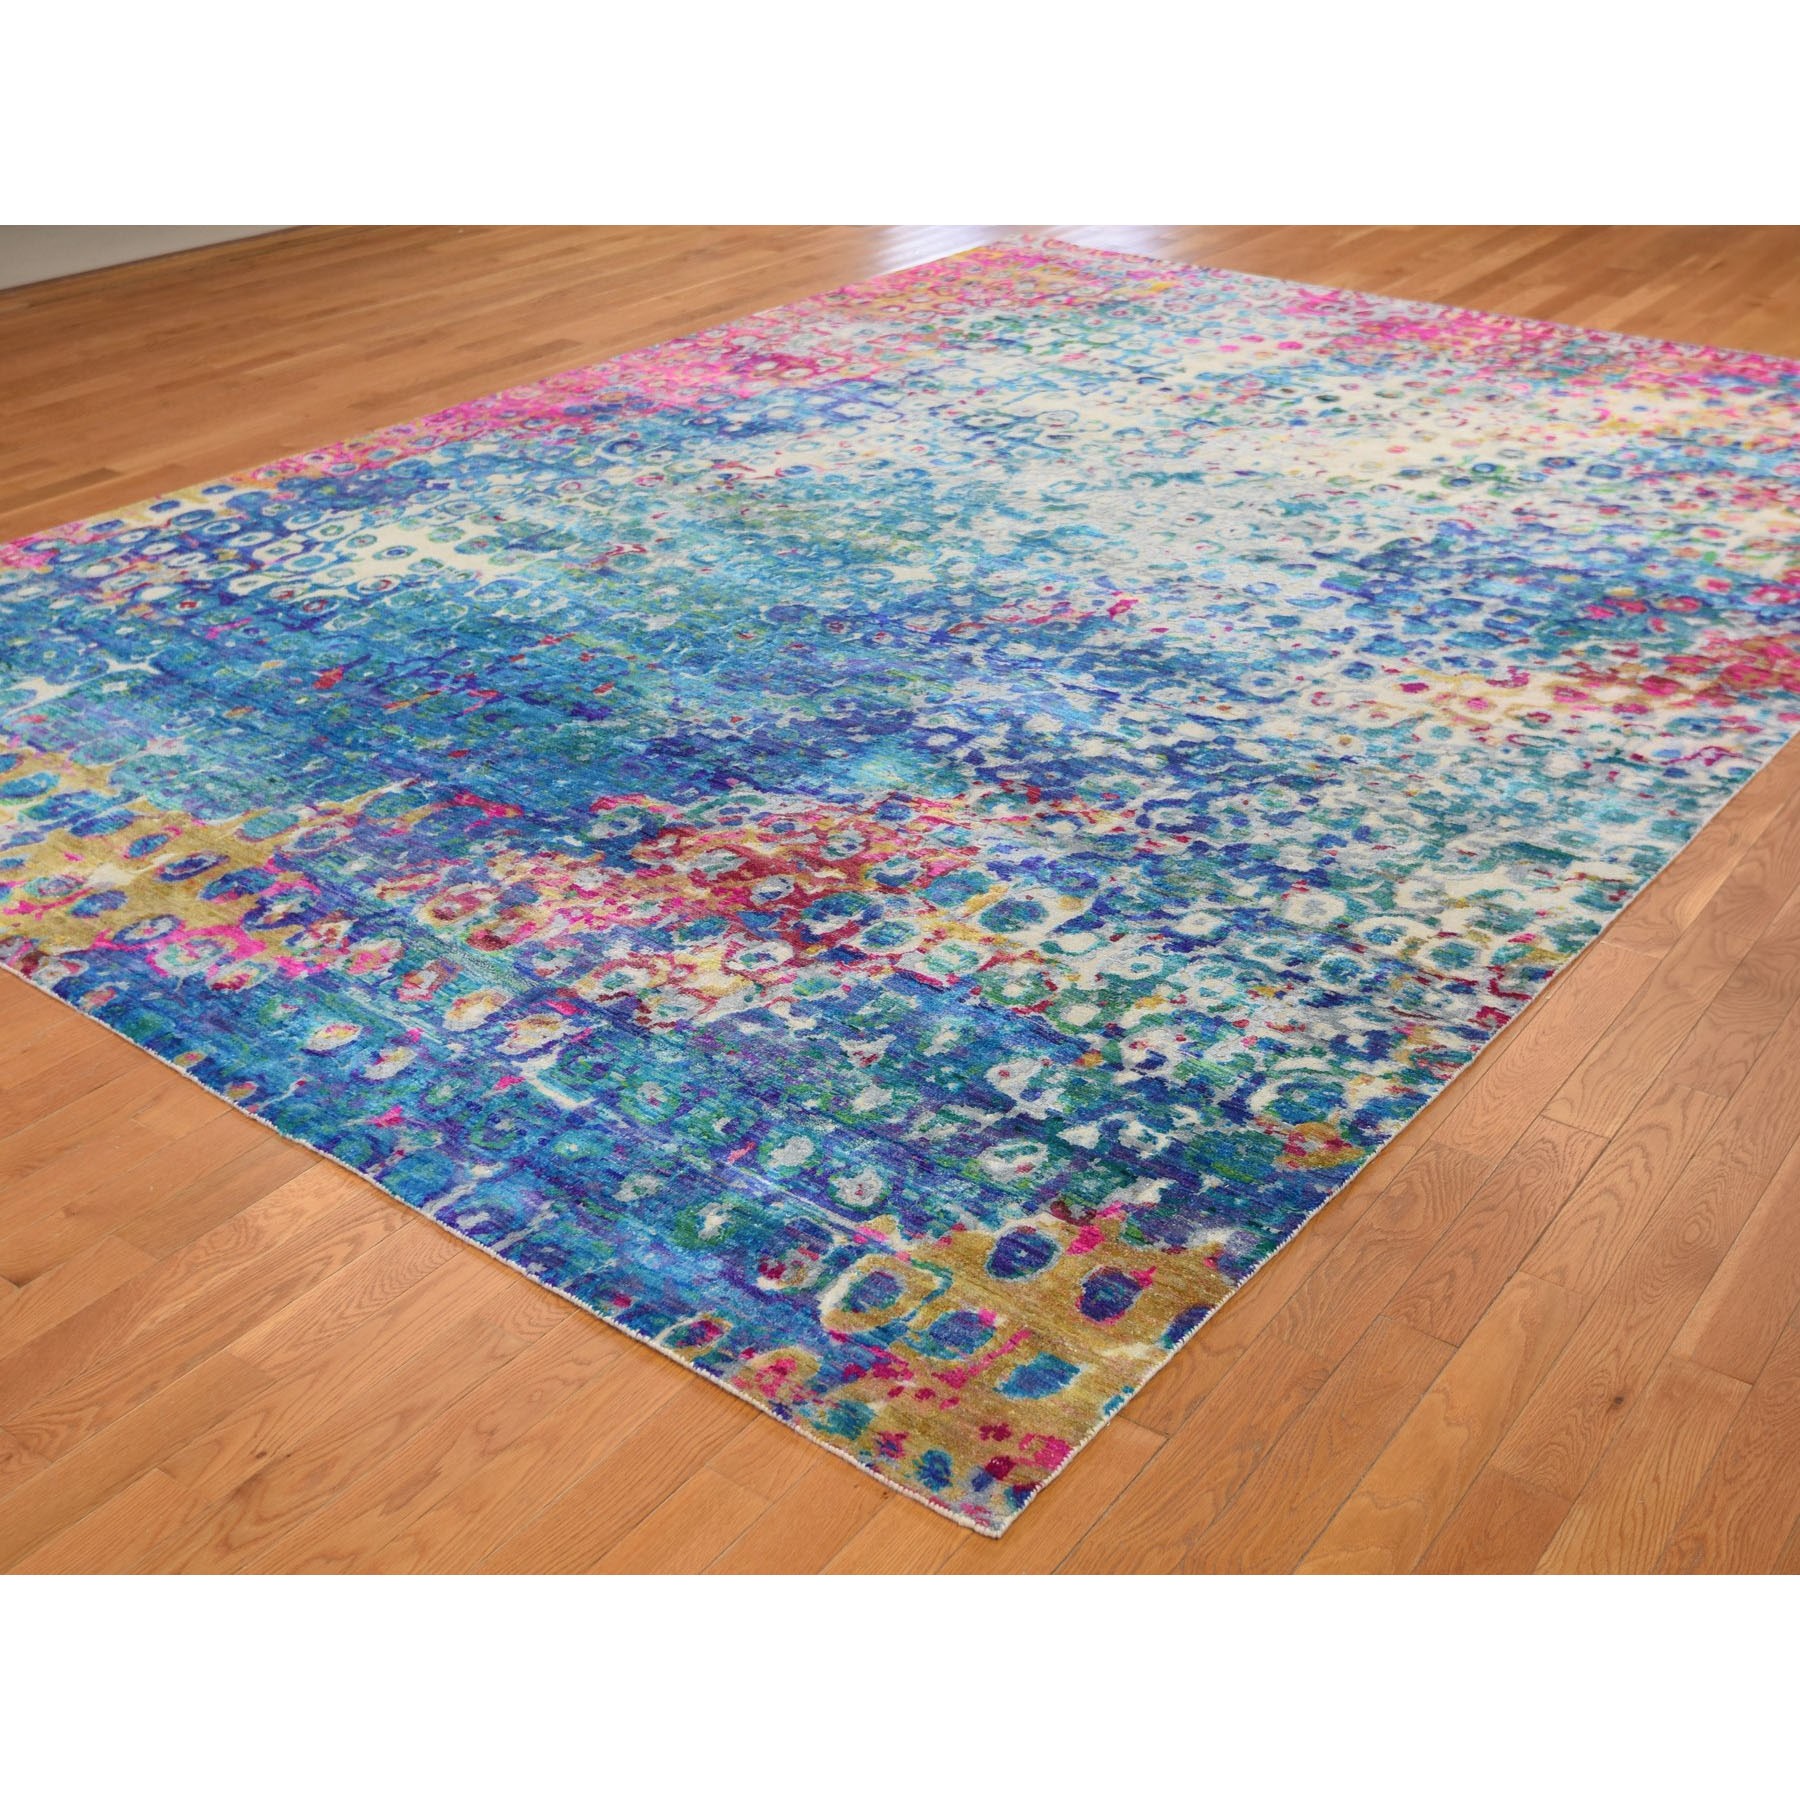 10-x13-9  THE PEACOCK, Sari Silk Colorful Hand Knotted Oriental Rug 